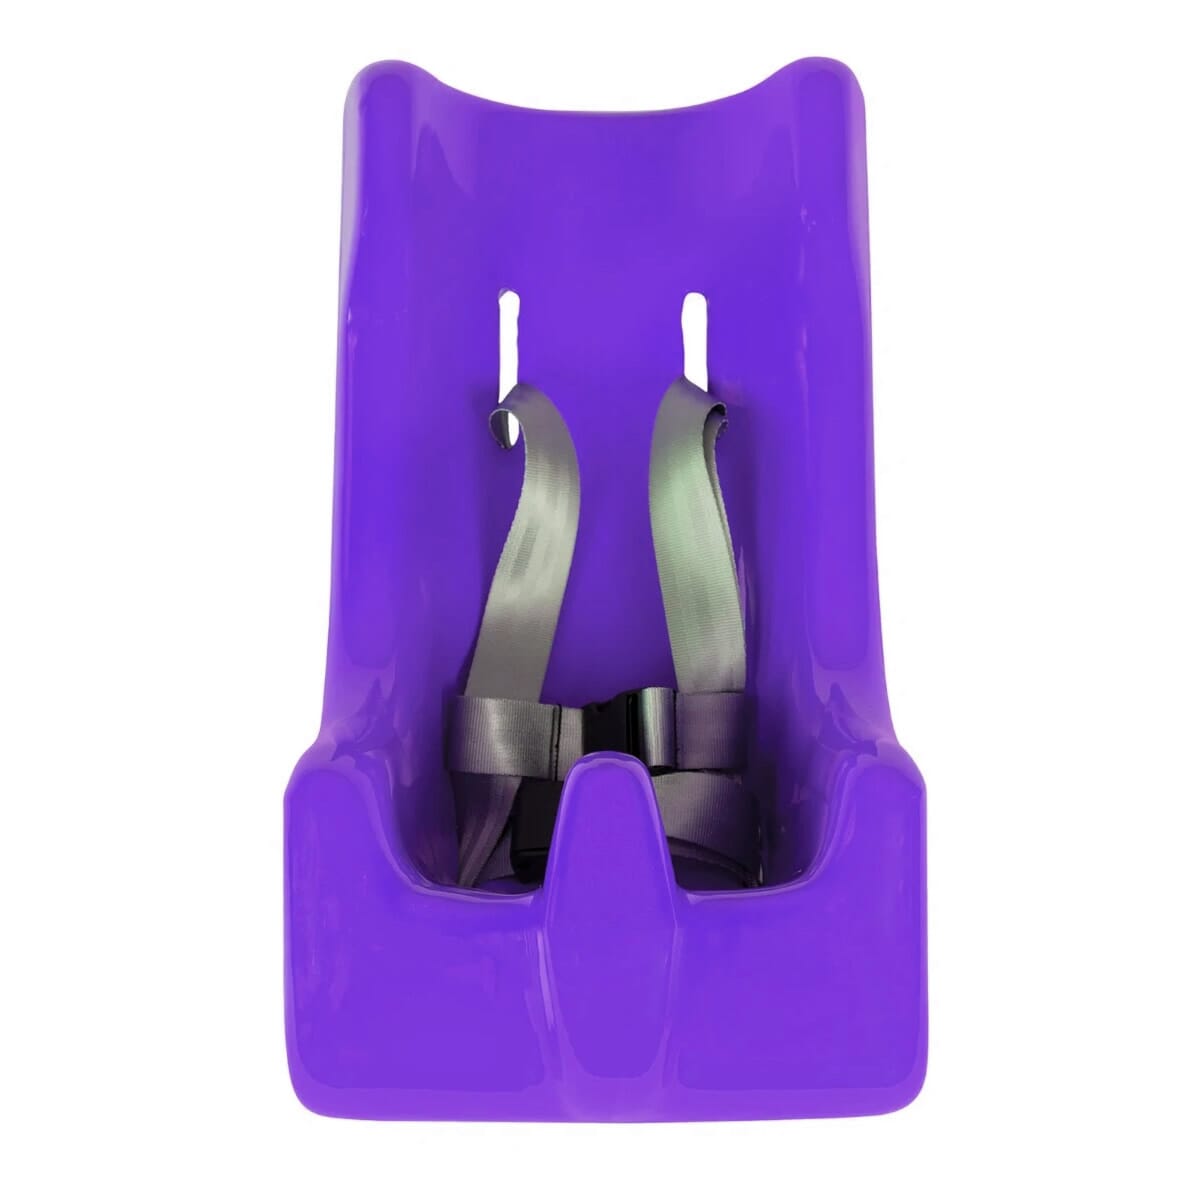 View Tumble Forms Feeder Seat Purple Small information